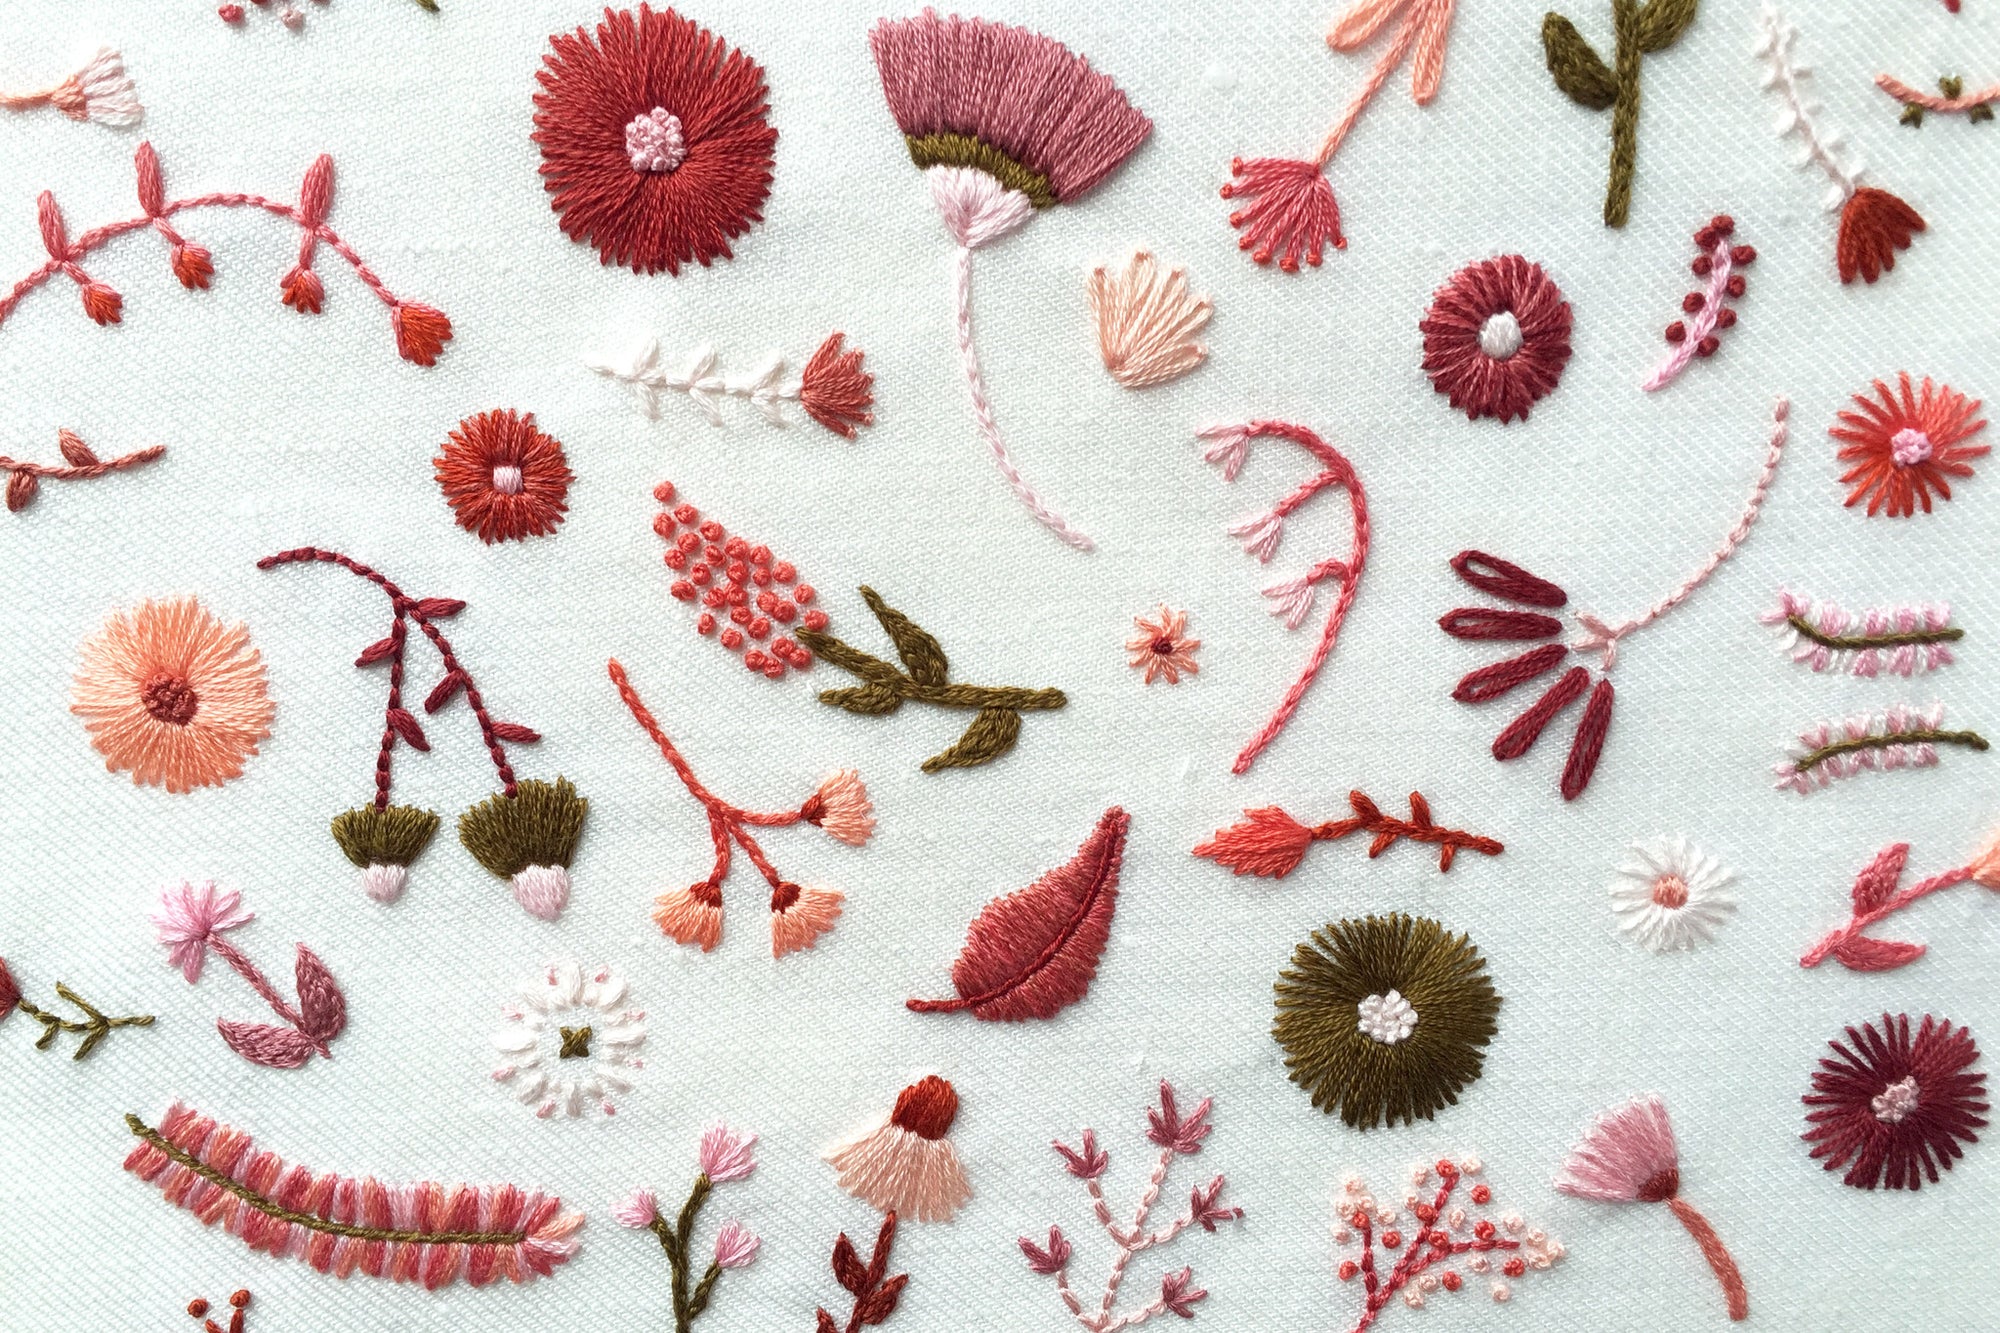 More Details About My Hand Embroidery for House Beautiful Magazine